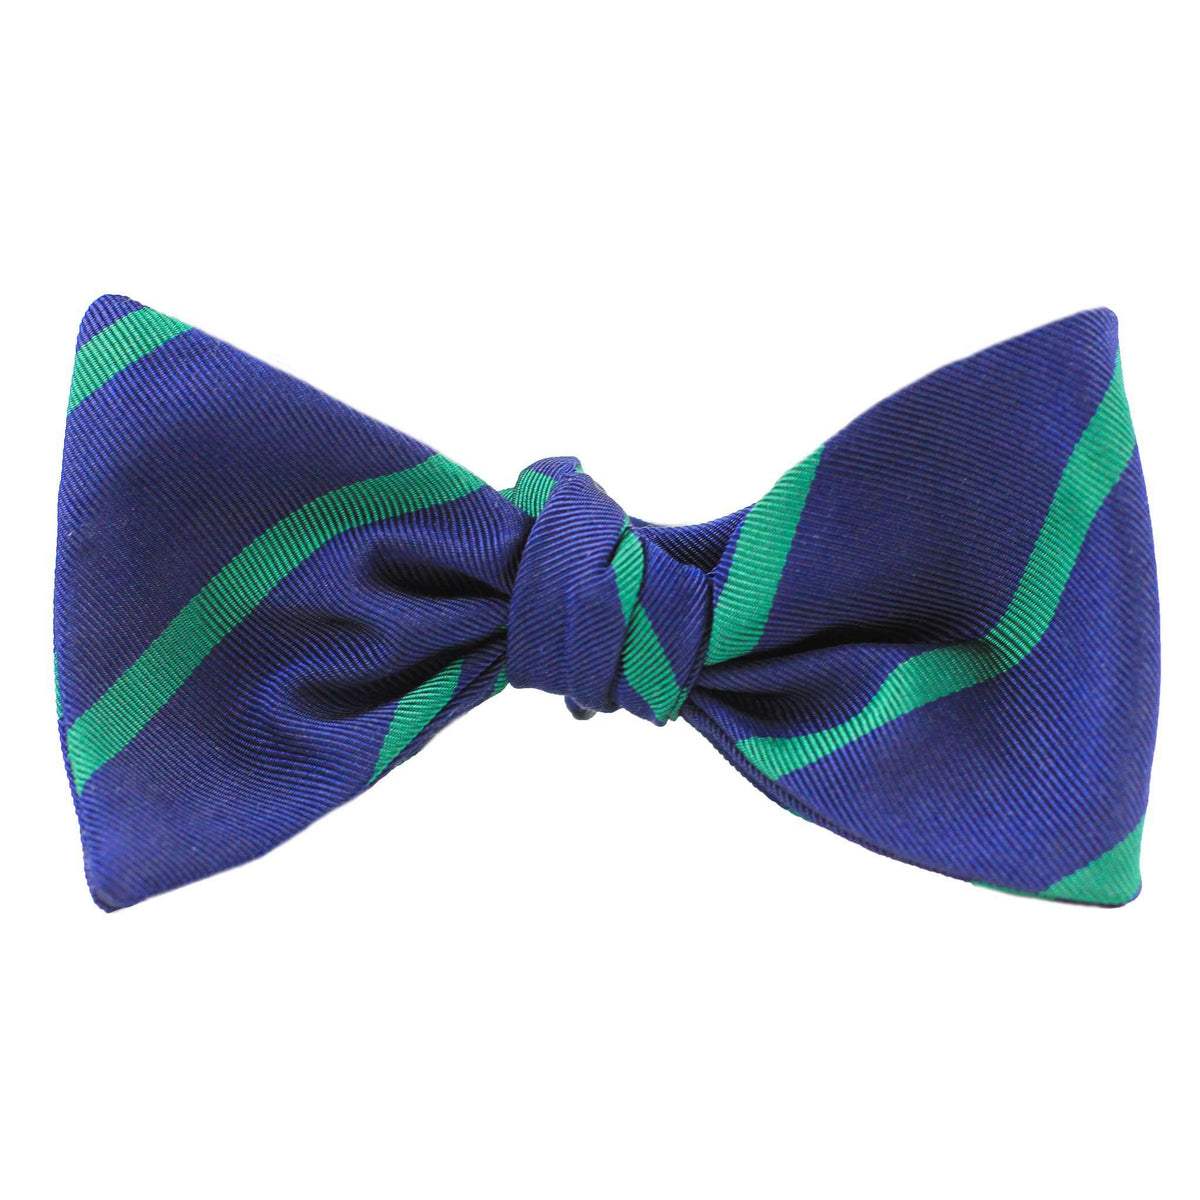 Mogador Bow Tie in Navy with Green Stripe by Res Ipsa - Country Club Prep